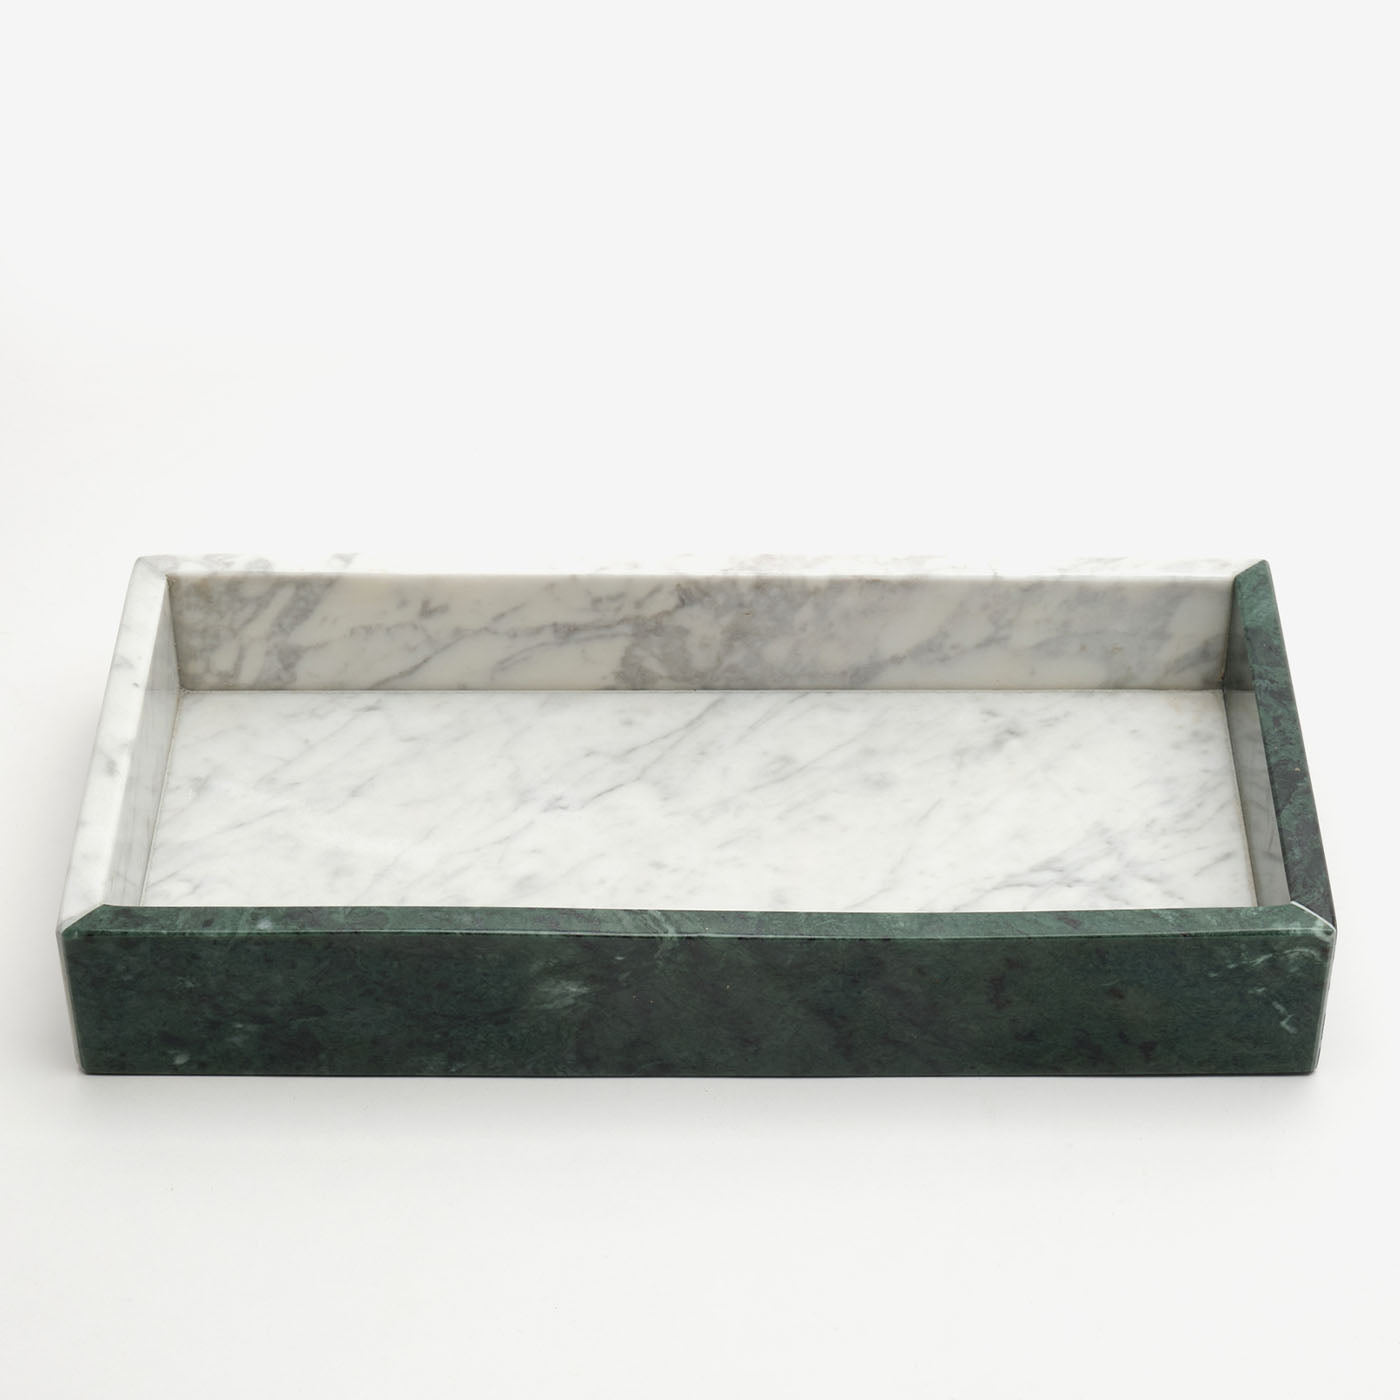 Carrara Marble and Green Marble Tray #3 - Alternative view 1